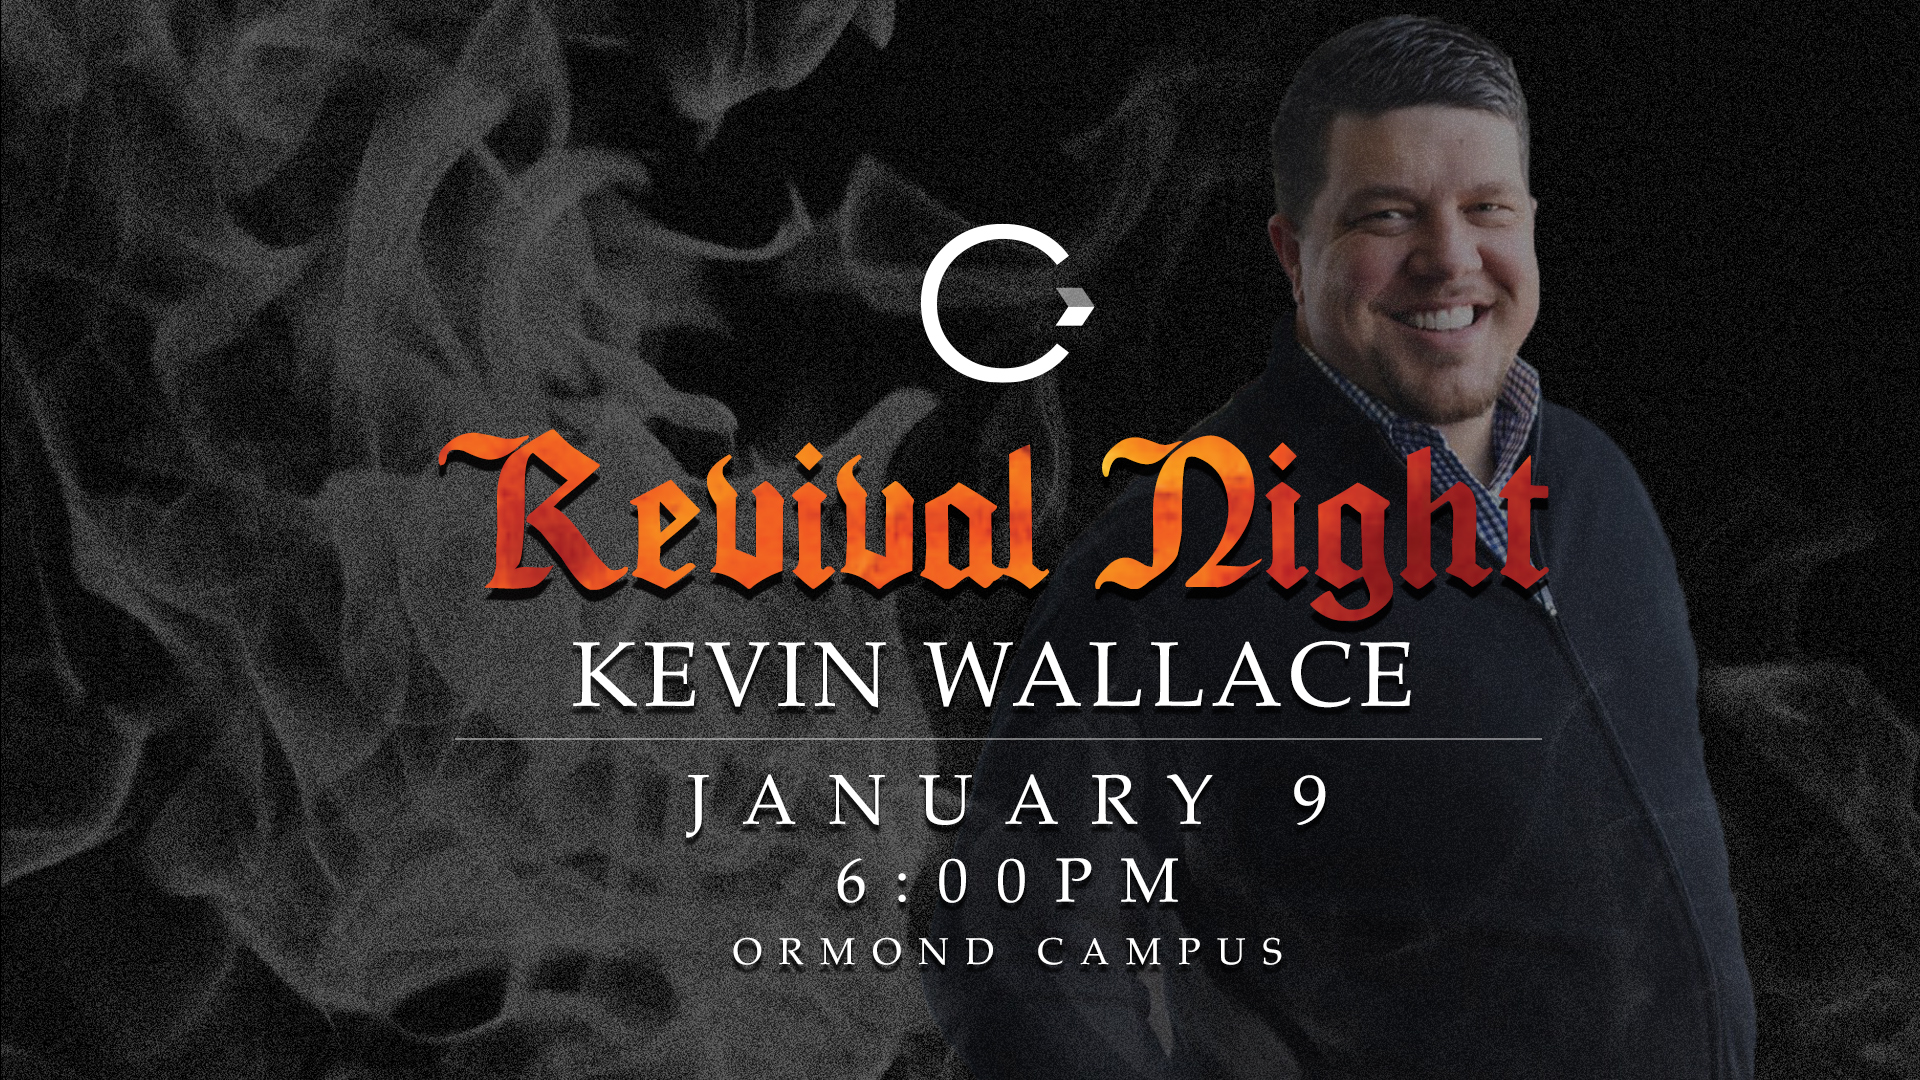 Revival Night with Kevin Wallace